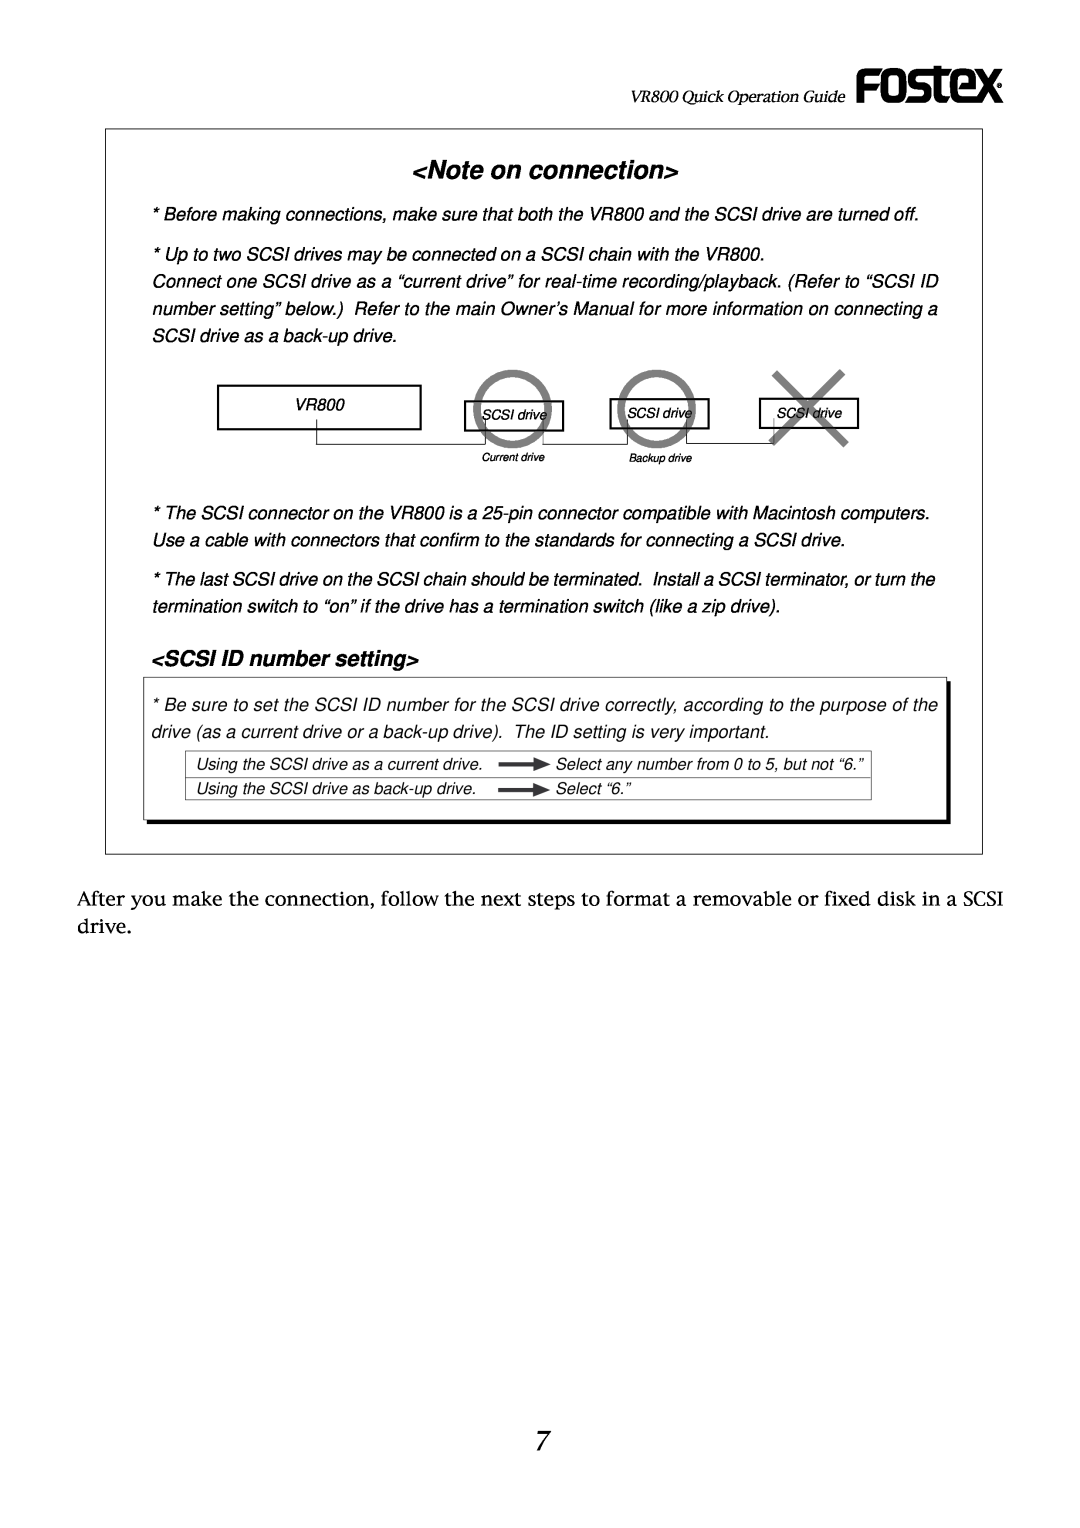 Fostex VR800 owner manual Note on connection, SCSI ID number setting 